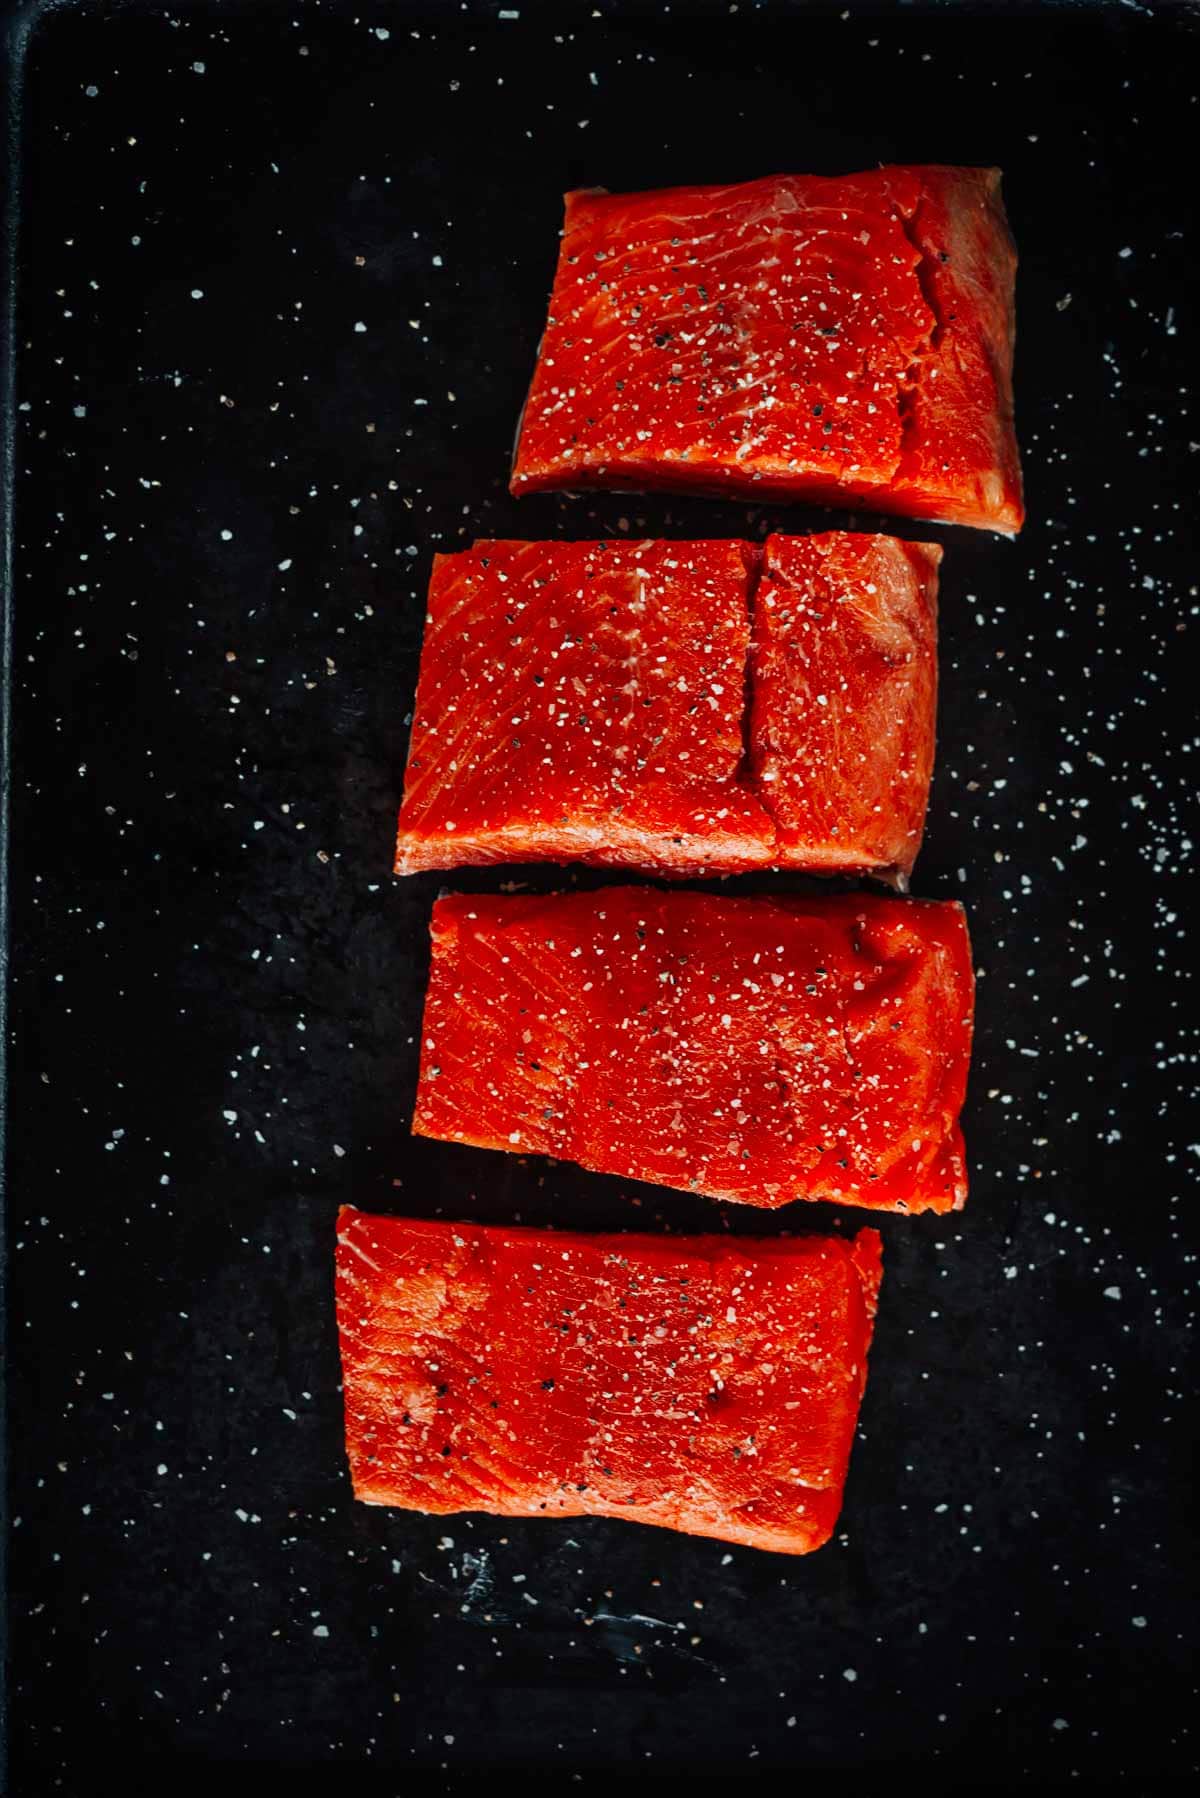 Four raw salmon fillets, evenly spaced, placed on a black surface with coarse salt scattered around.